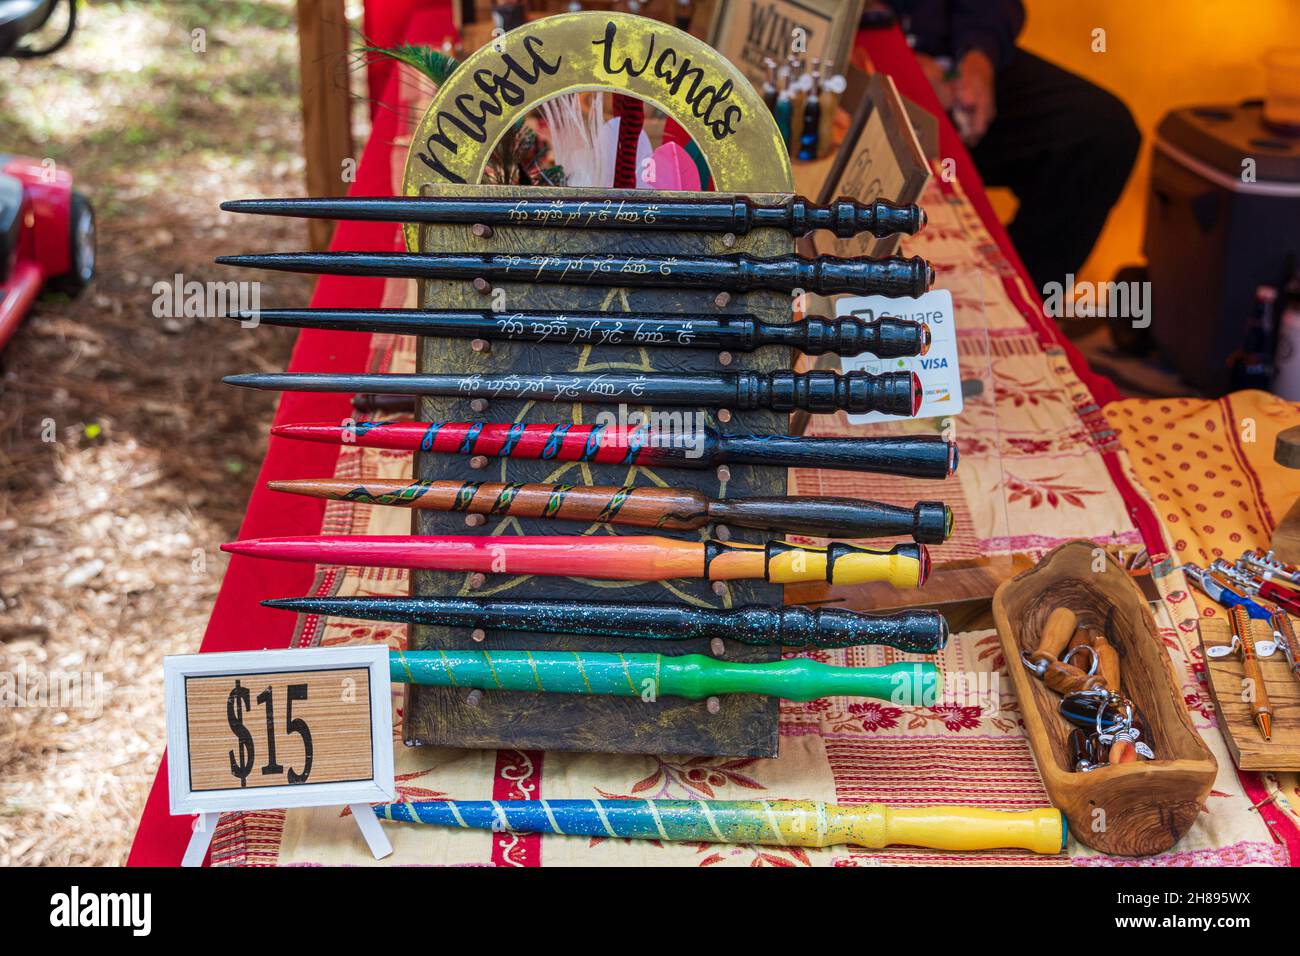 Magic wands for sale at the Lady of the Lakes Renaissance Faire - Tavares, Florida, USA Stock Photo